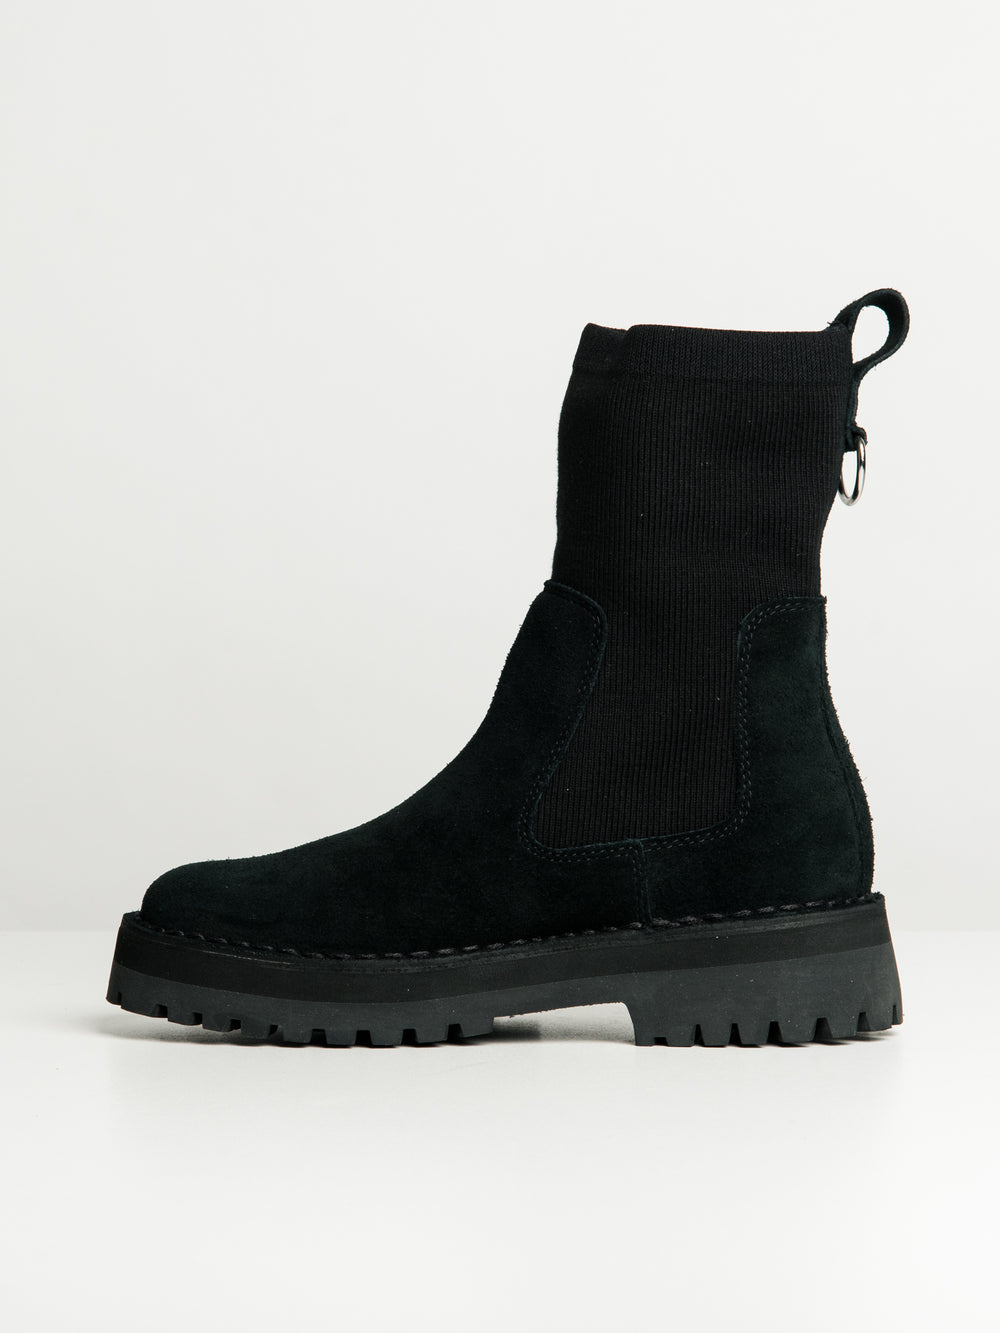 WOMENS CLARKS ROCK KNIT BOOT - CLEARANCE